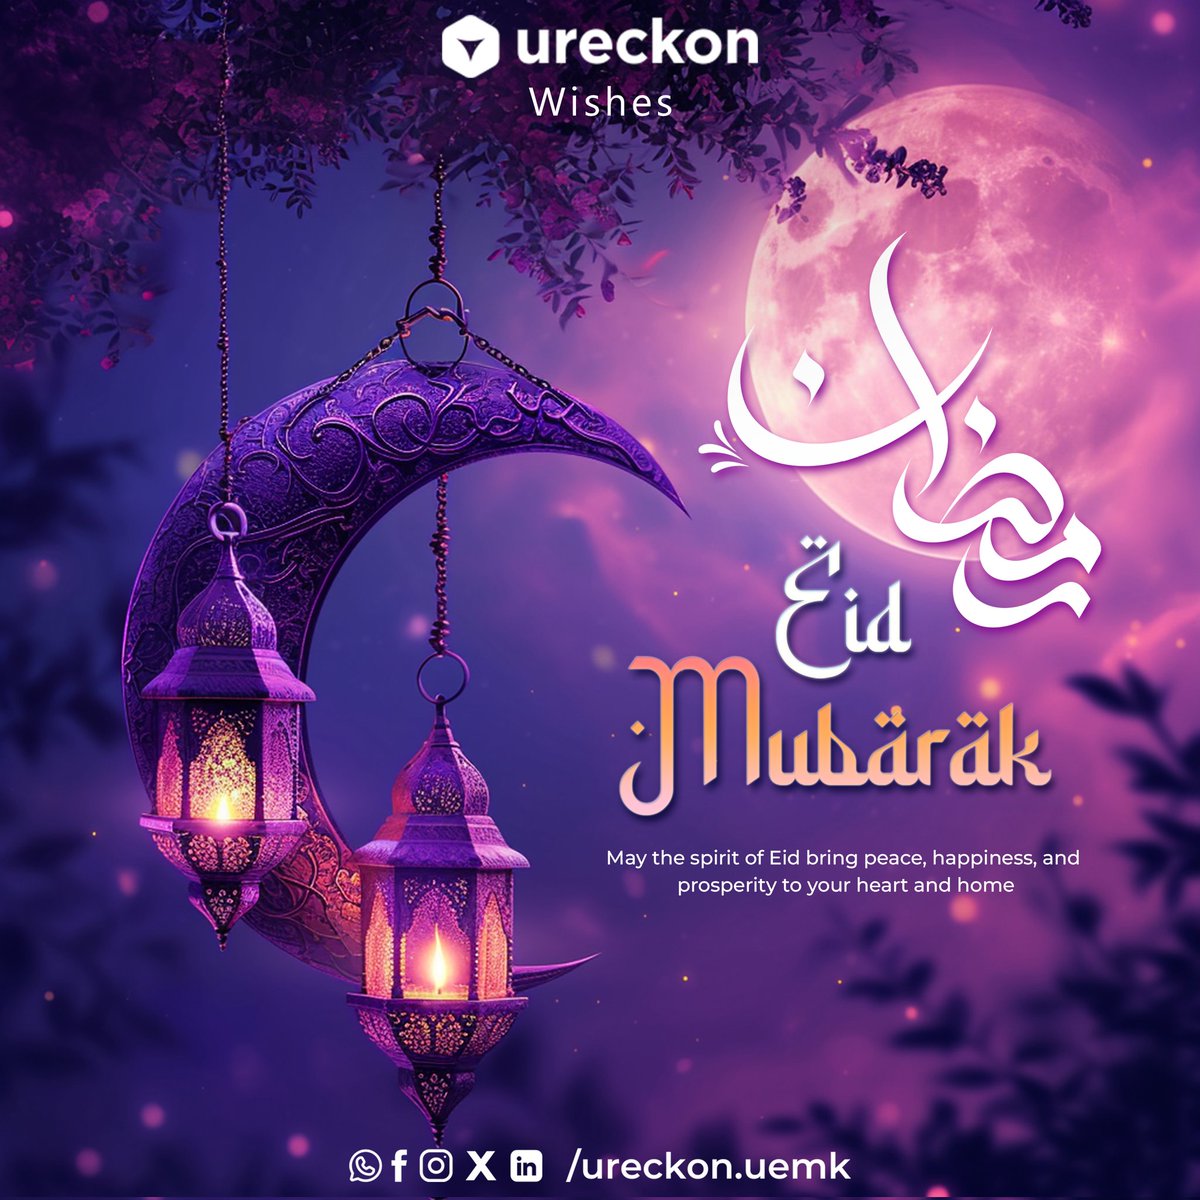 Eid ul-Fitr is a joyous celebration for Muslims worldwide, marking the end of Ramadan. It begins with the new moon sighting, special prayers, and gifts. It's a time for reflection, gratitude, community bonding, and hope for a prosperous year.